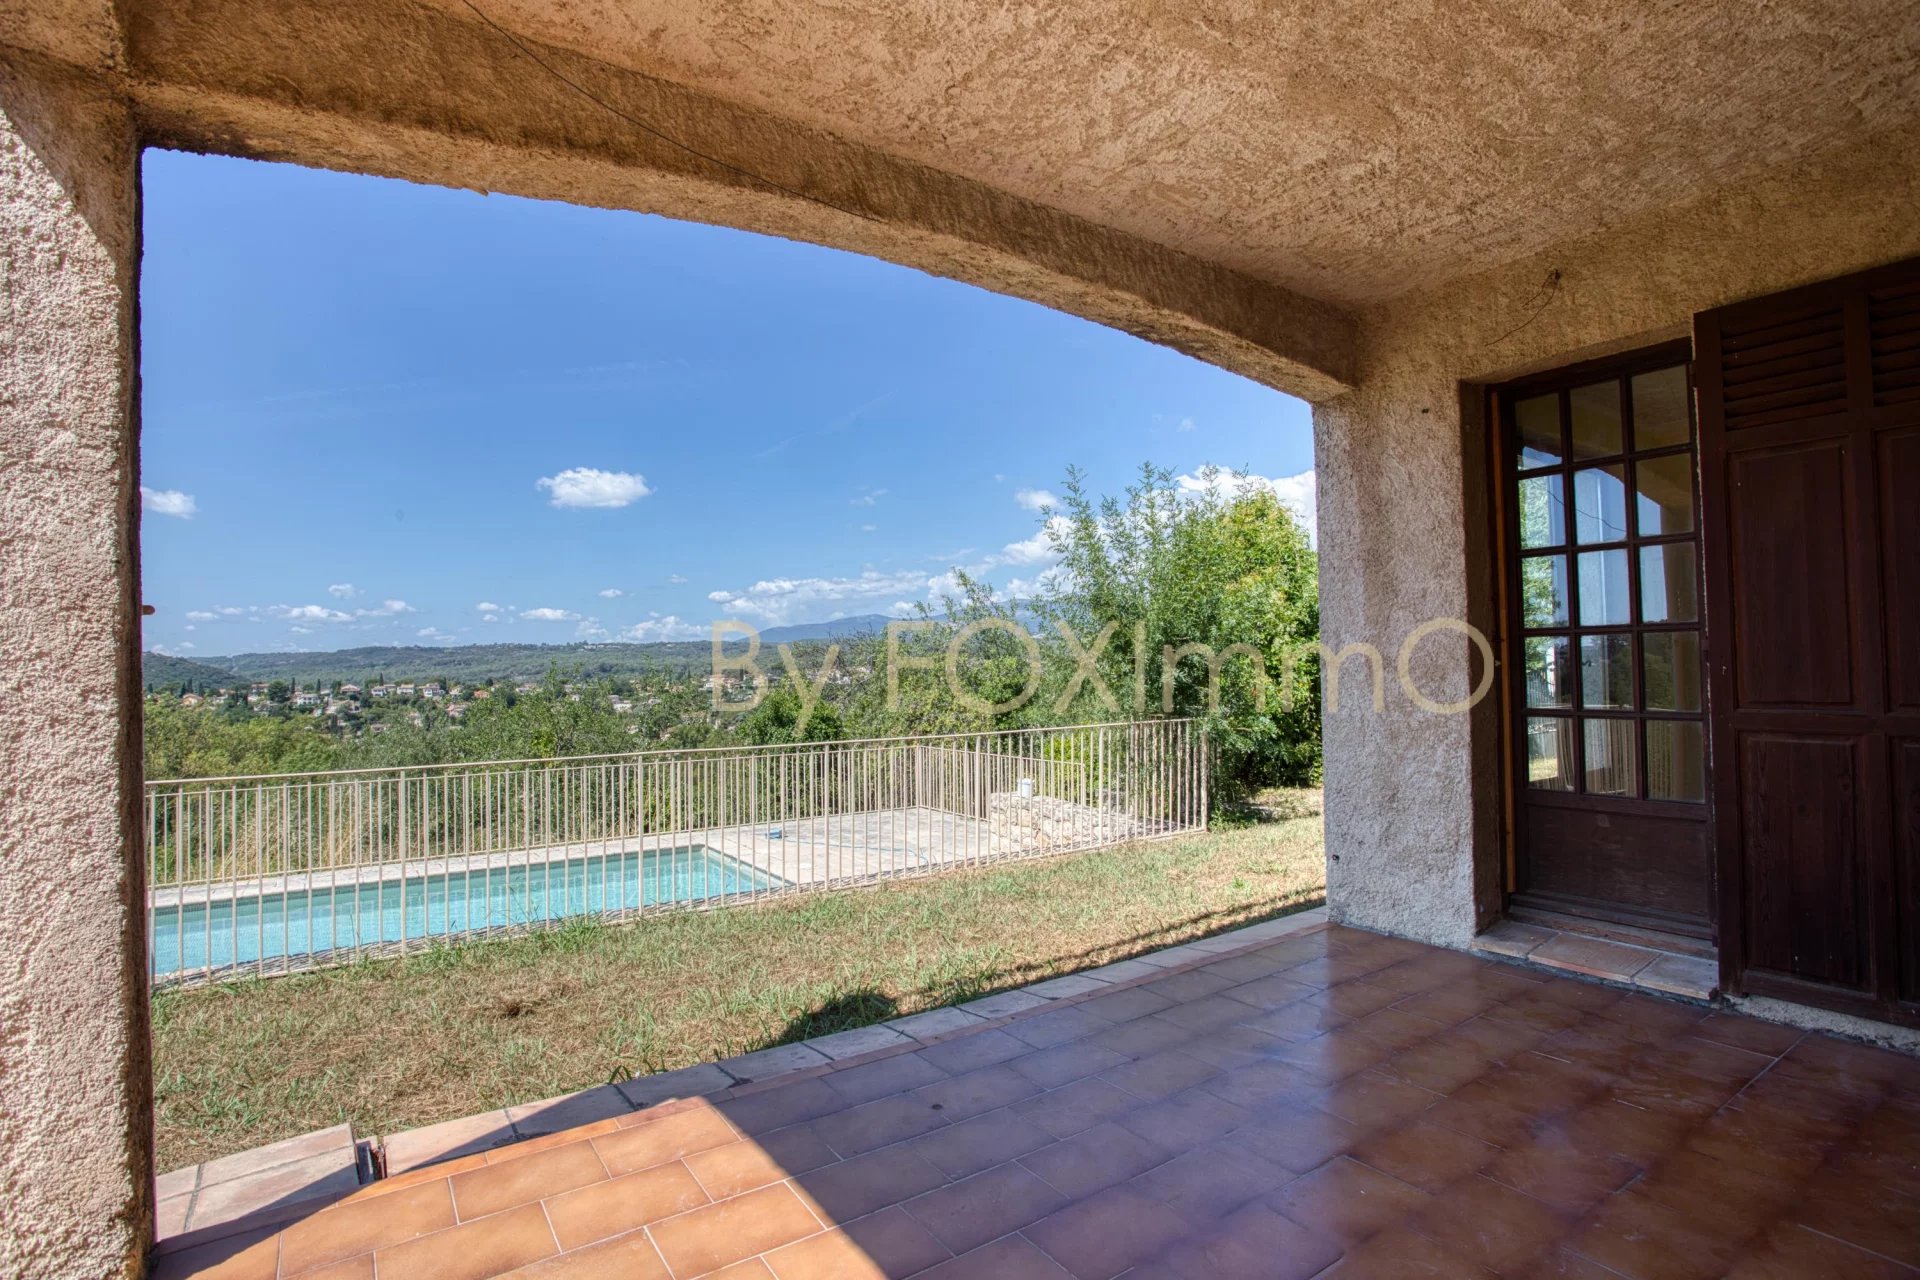 FOR SALE On the Côte d'Azur, Saint Paul de Vence, dominant villa, unobstructed view of the sea and mountains, flat garden, swimming pool